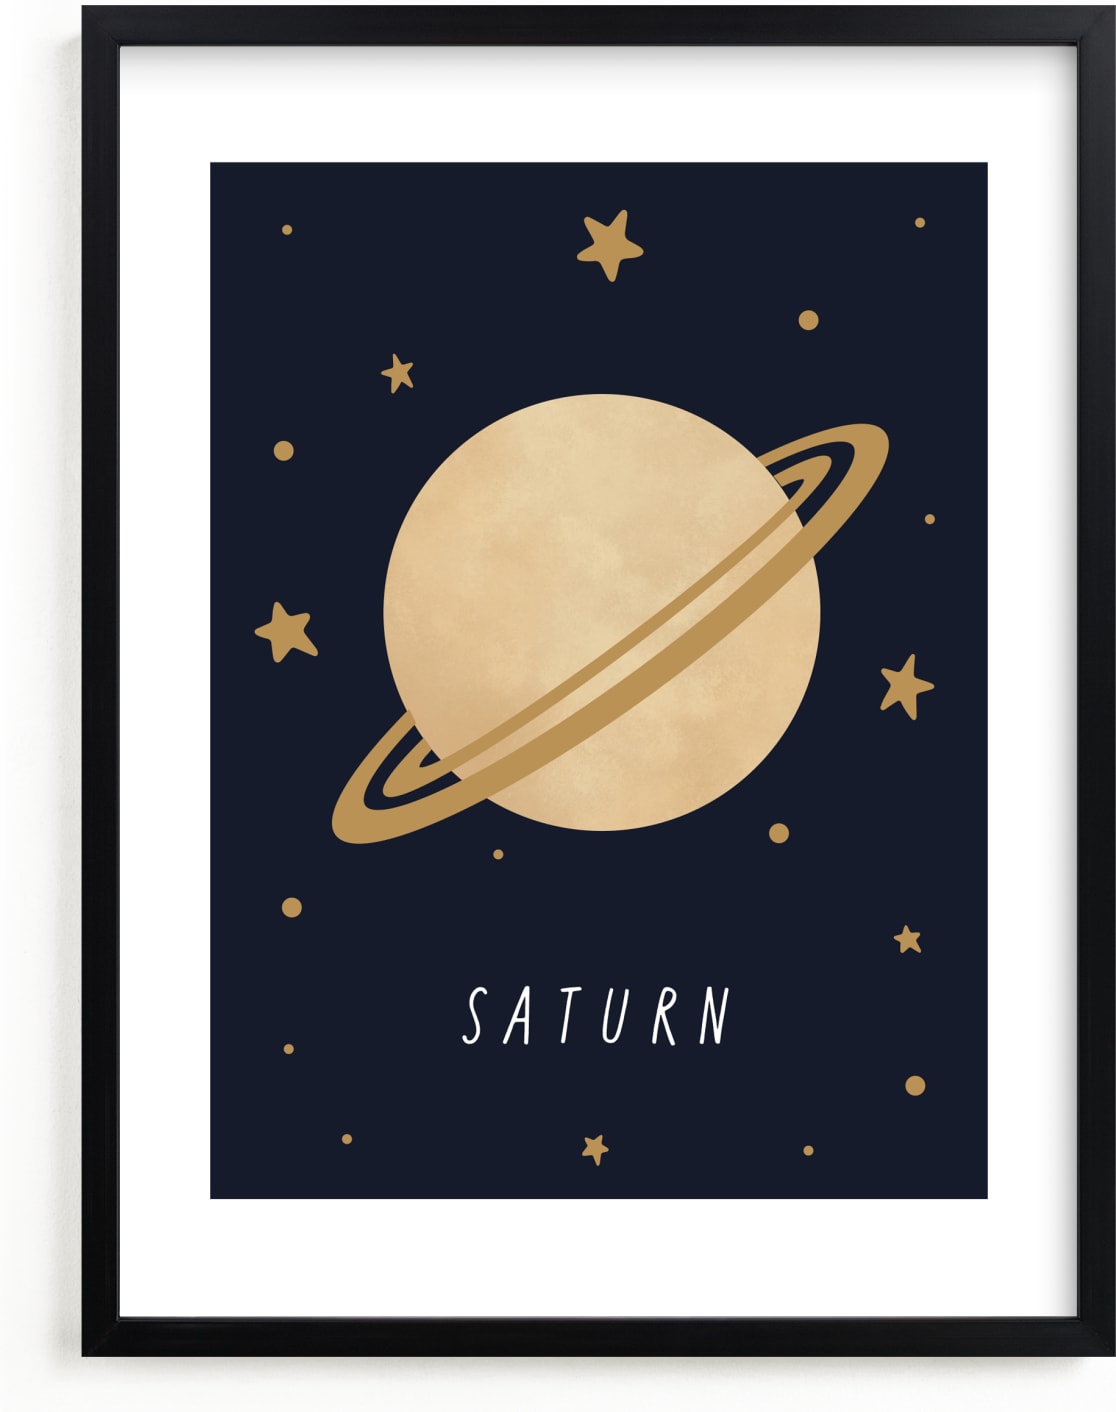 This is a blue, beige, gold art by Elly called Solar System VII (Saturn).